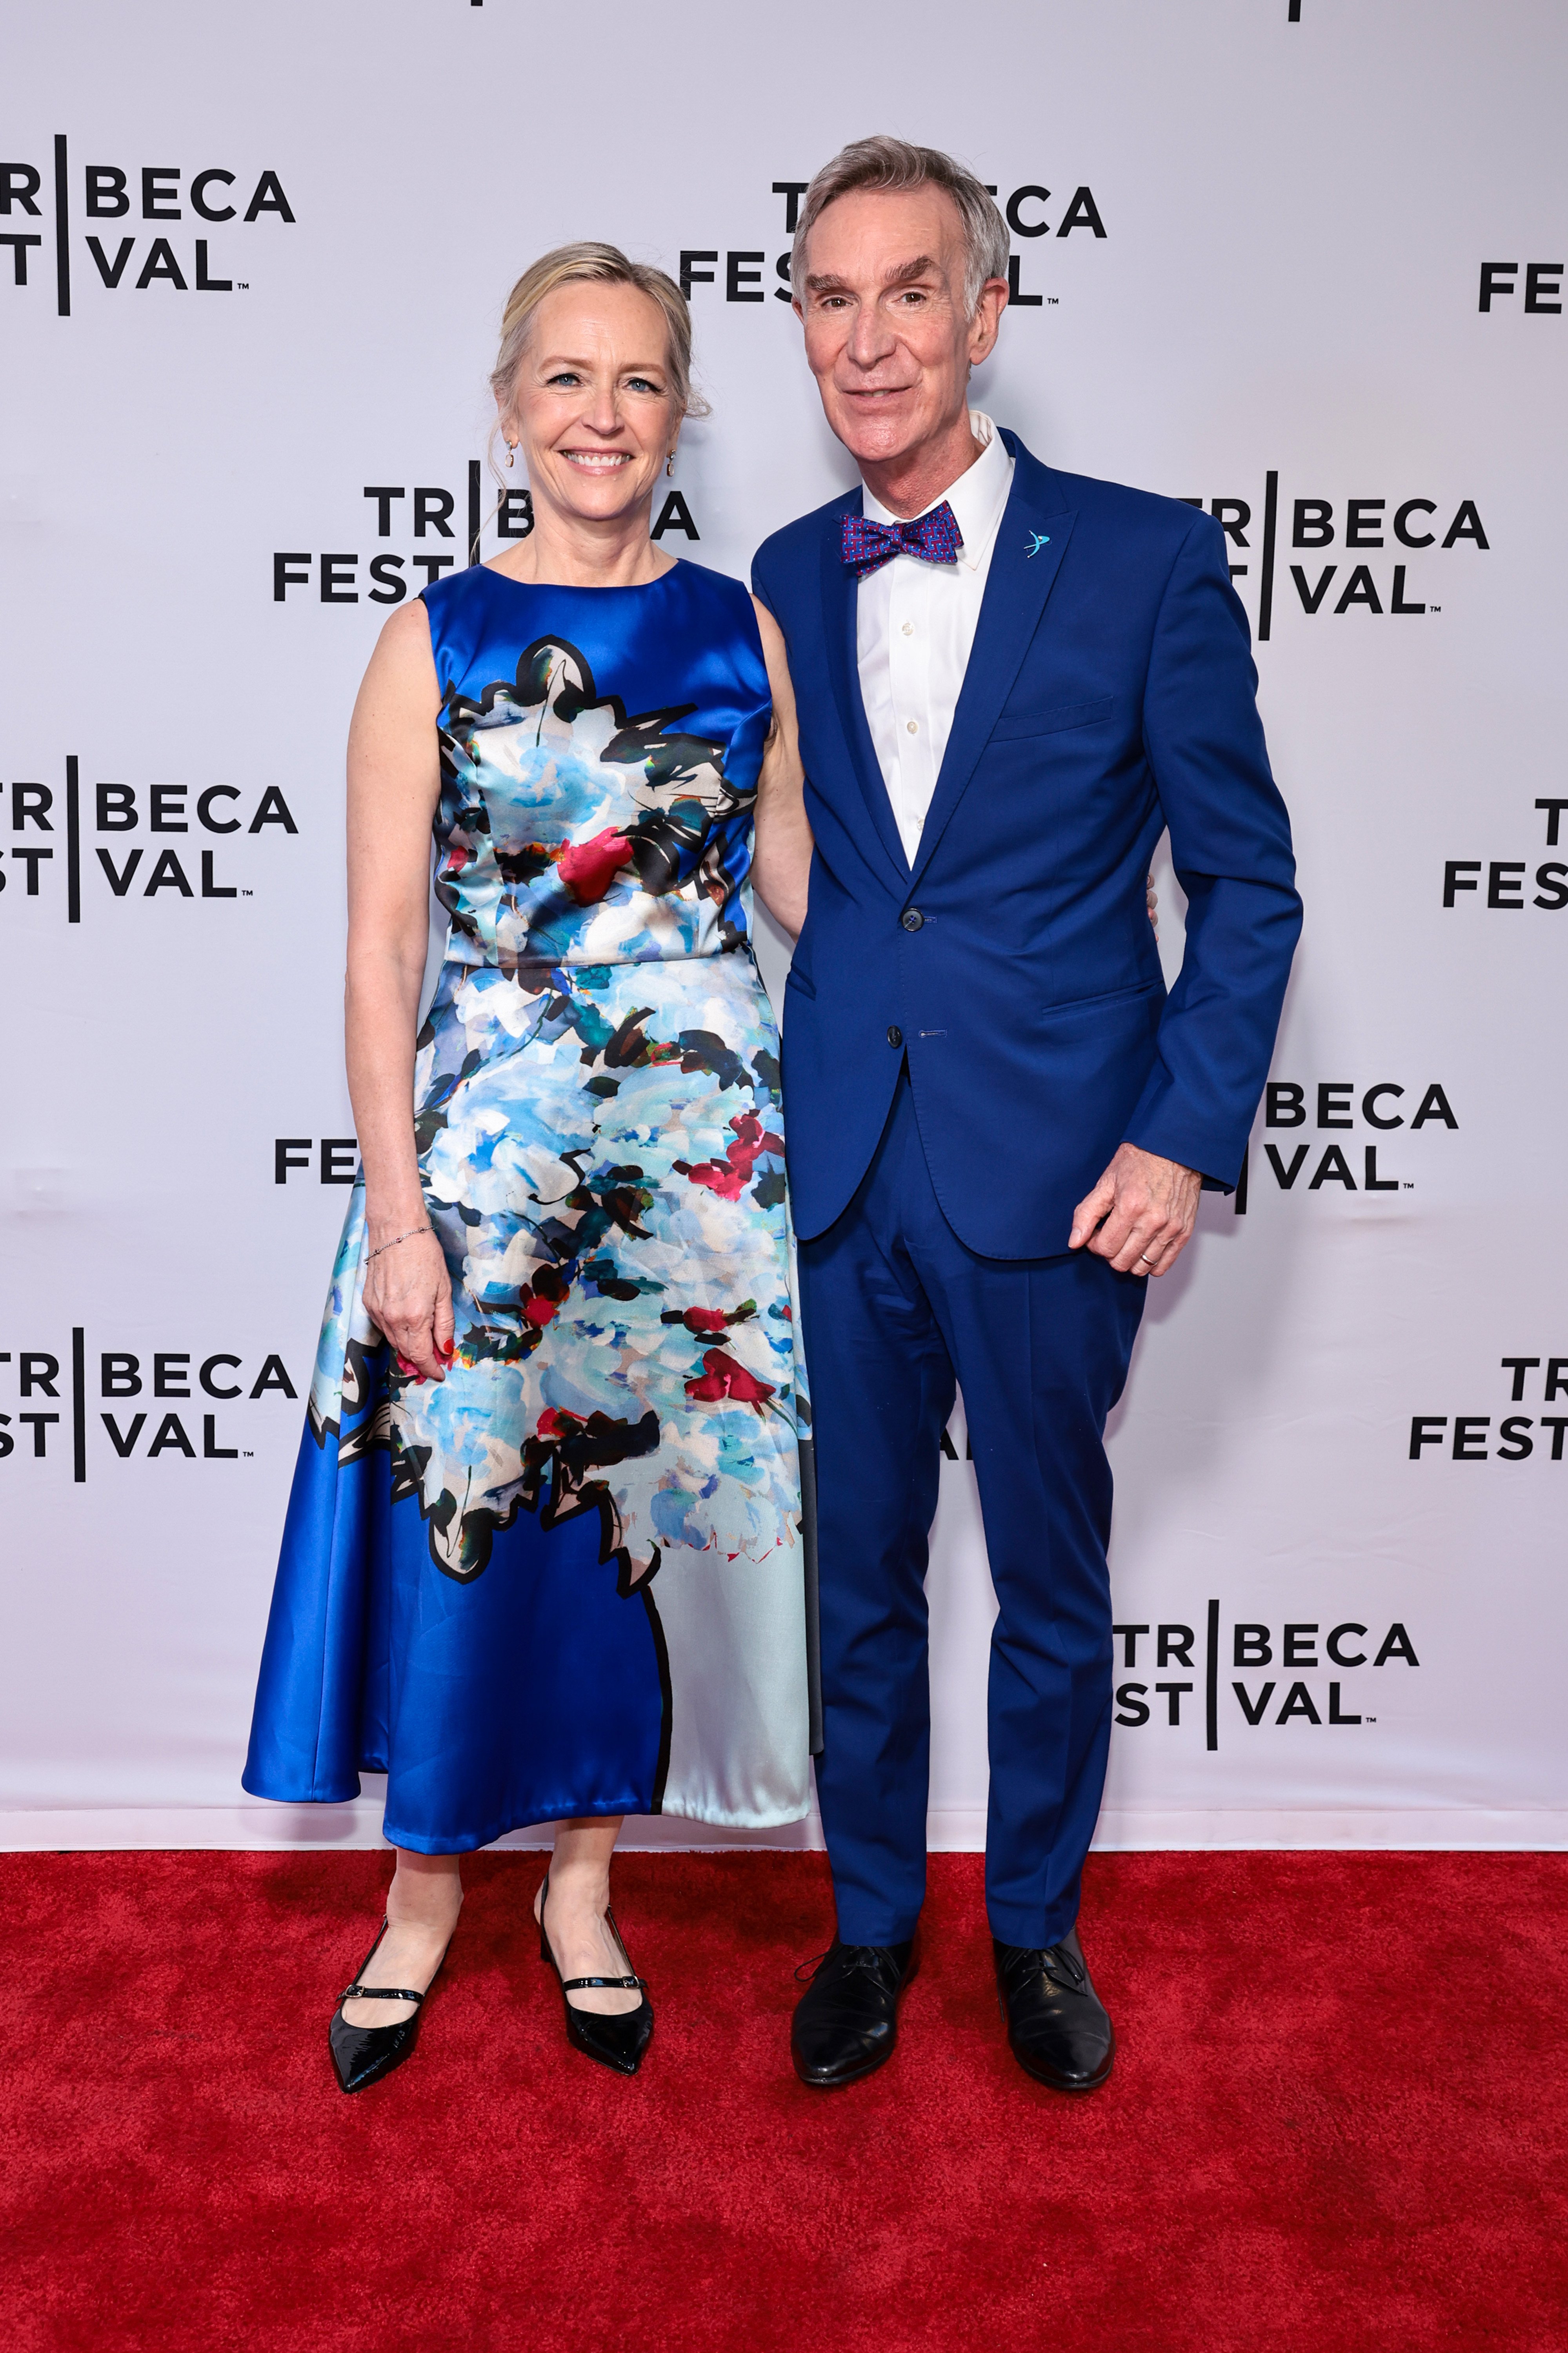 Liza Mundy and Bill Nye attend the Tribeca Festival at SVA Theater on June 17, 2022 in New York City. | Source: Getty Images 